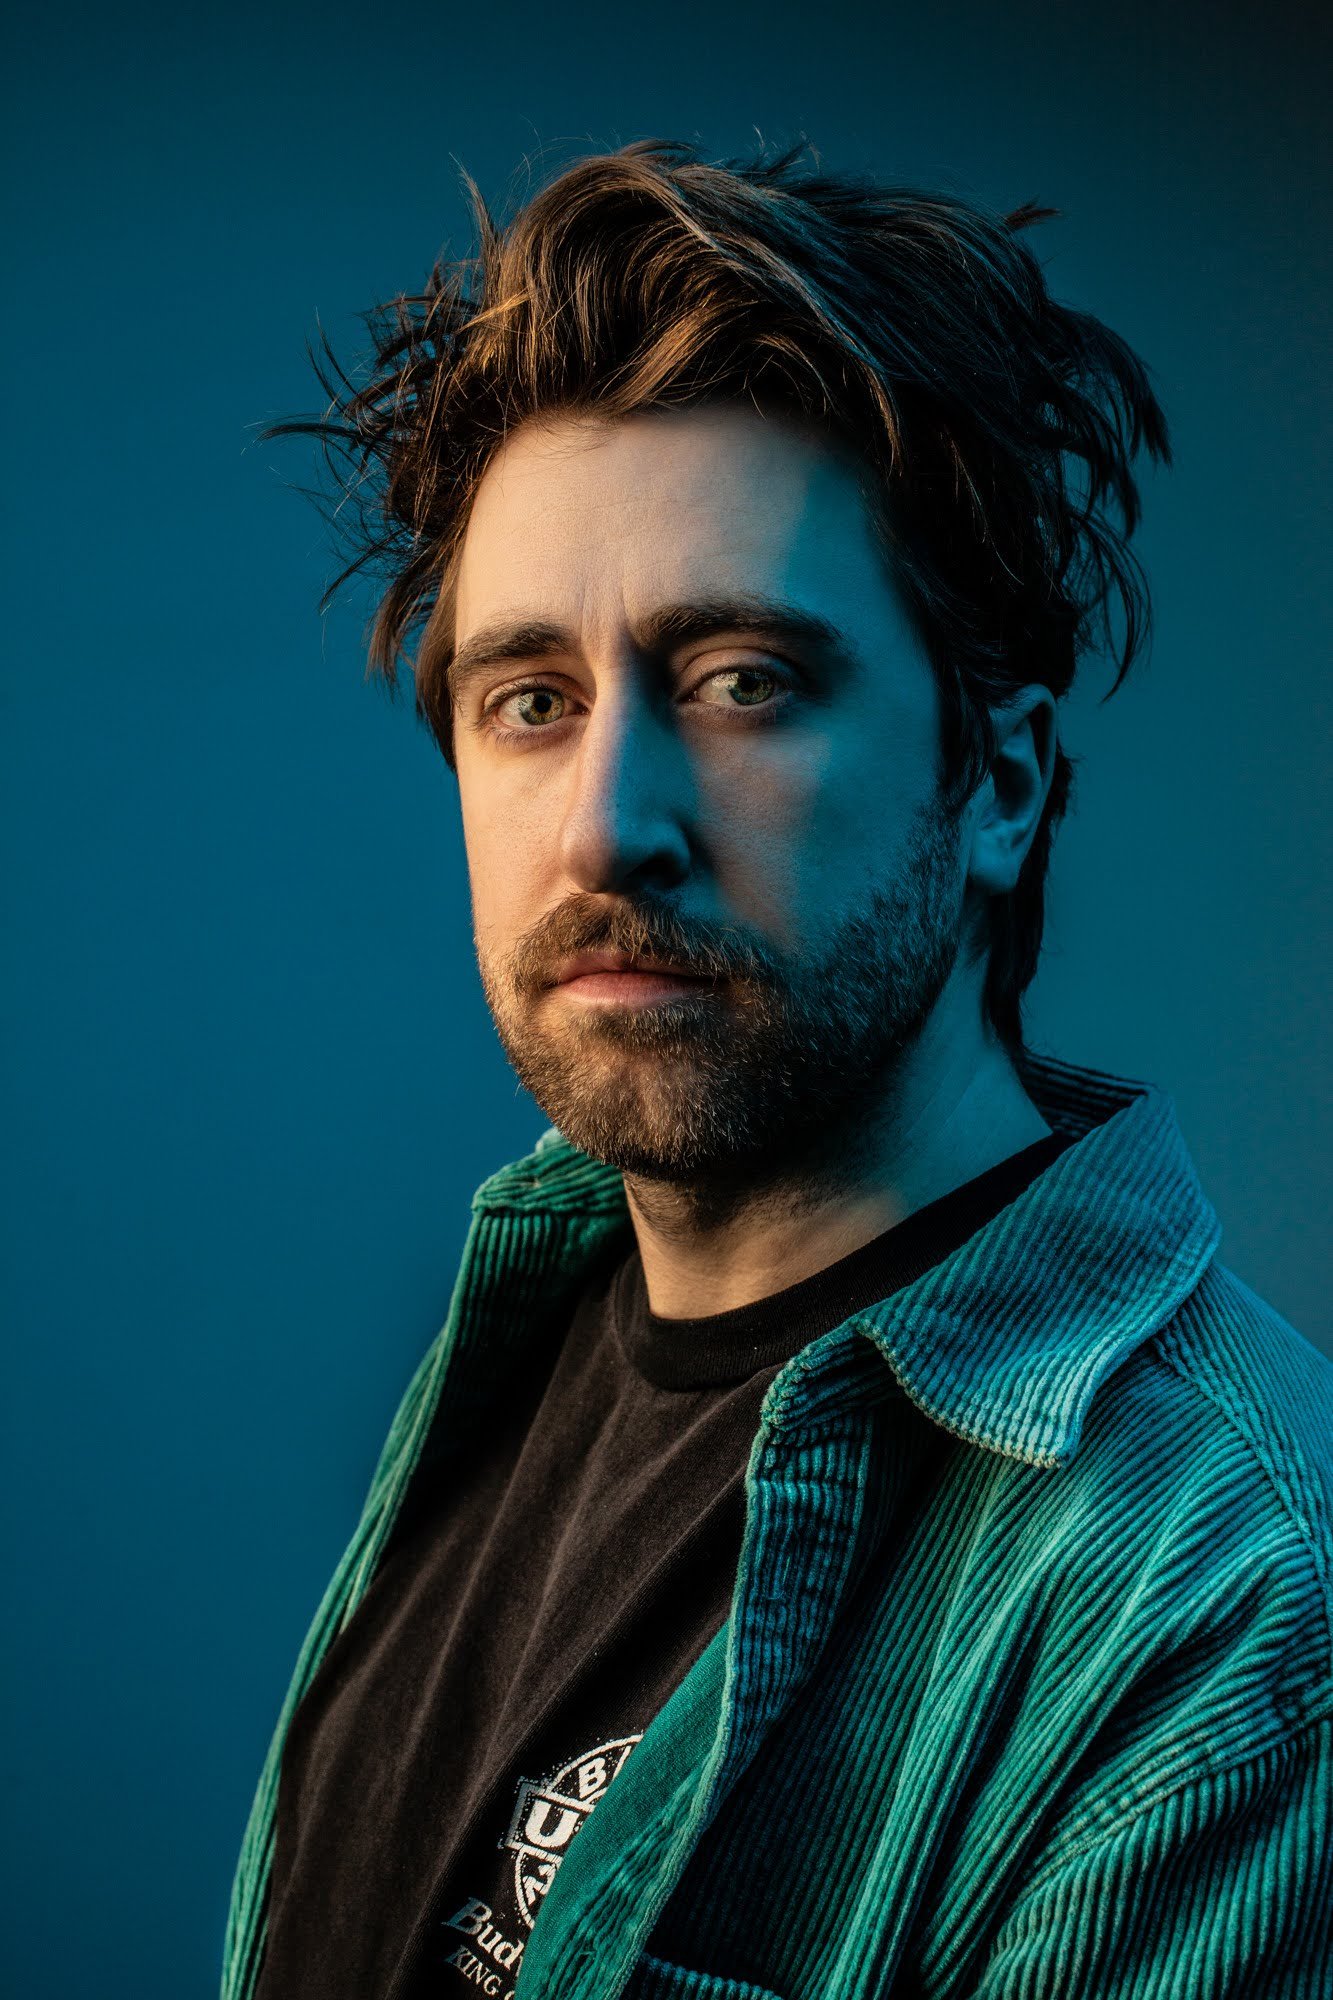 Headshot Photography for Actors by Jack Robert - Make a Strong First Impression like Jake Gyllenhaal